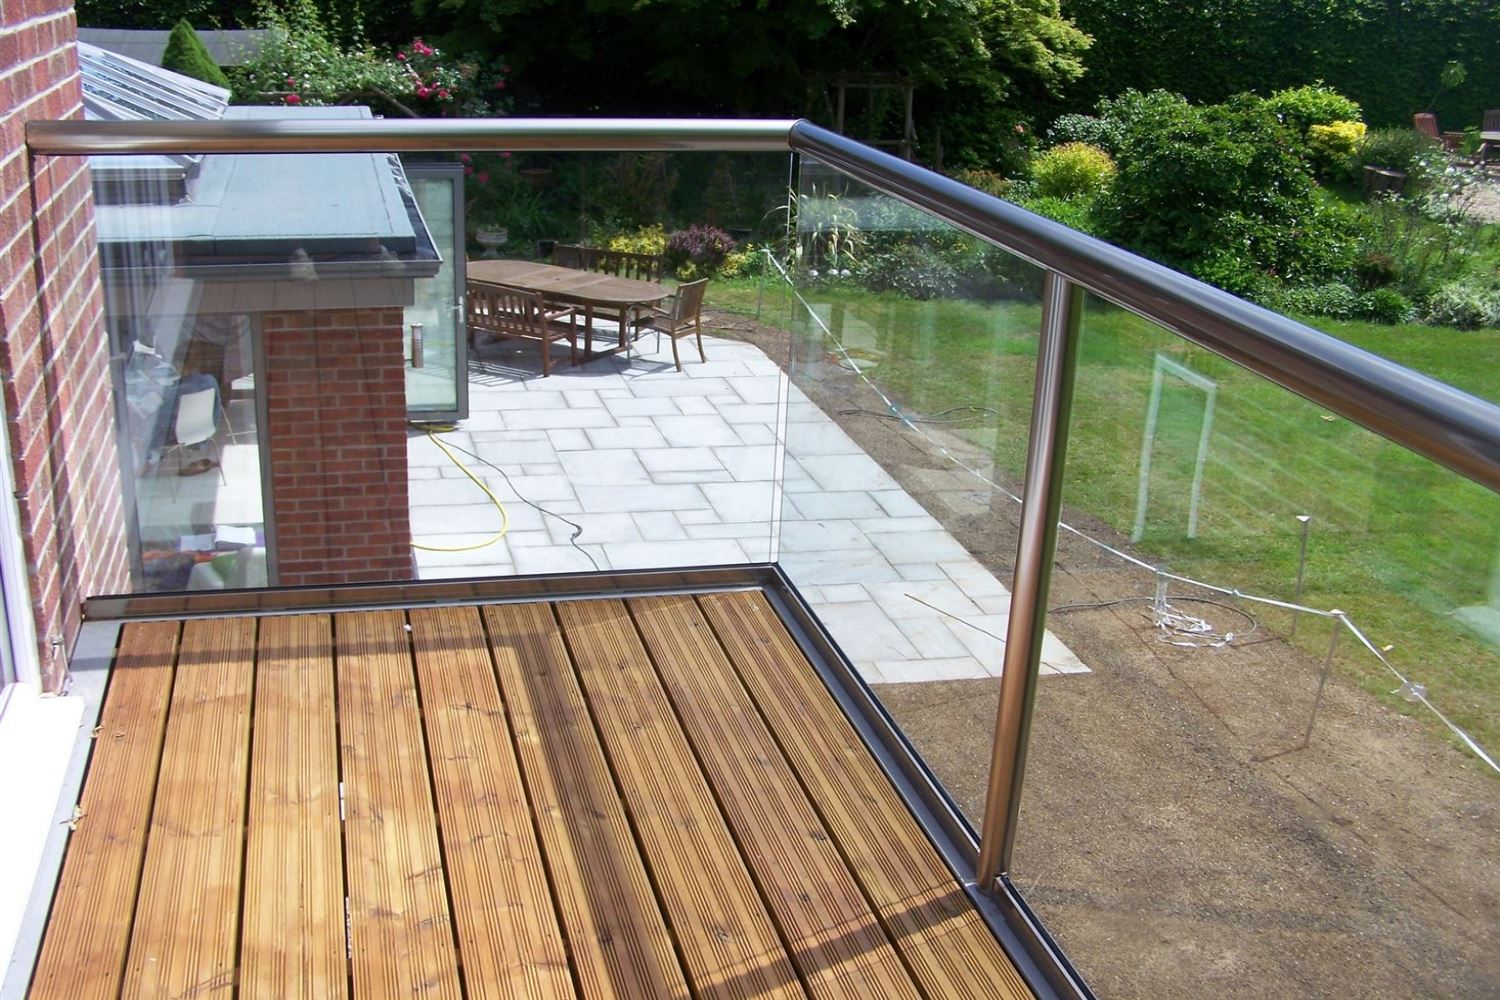 Orbit Royal Chrome Glass Balustrade overlooking a garden view with a patio